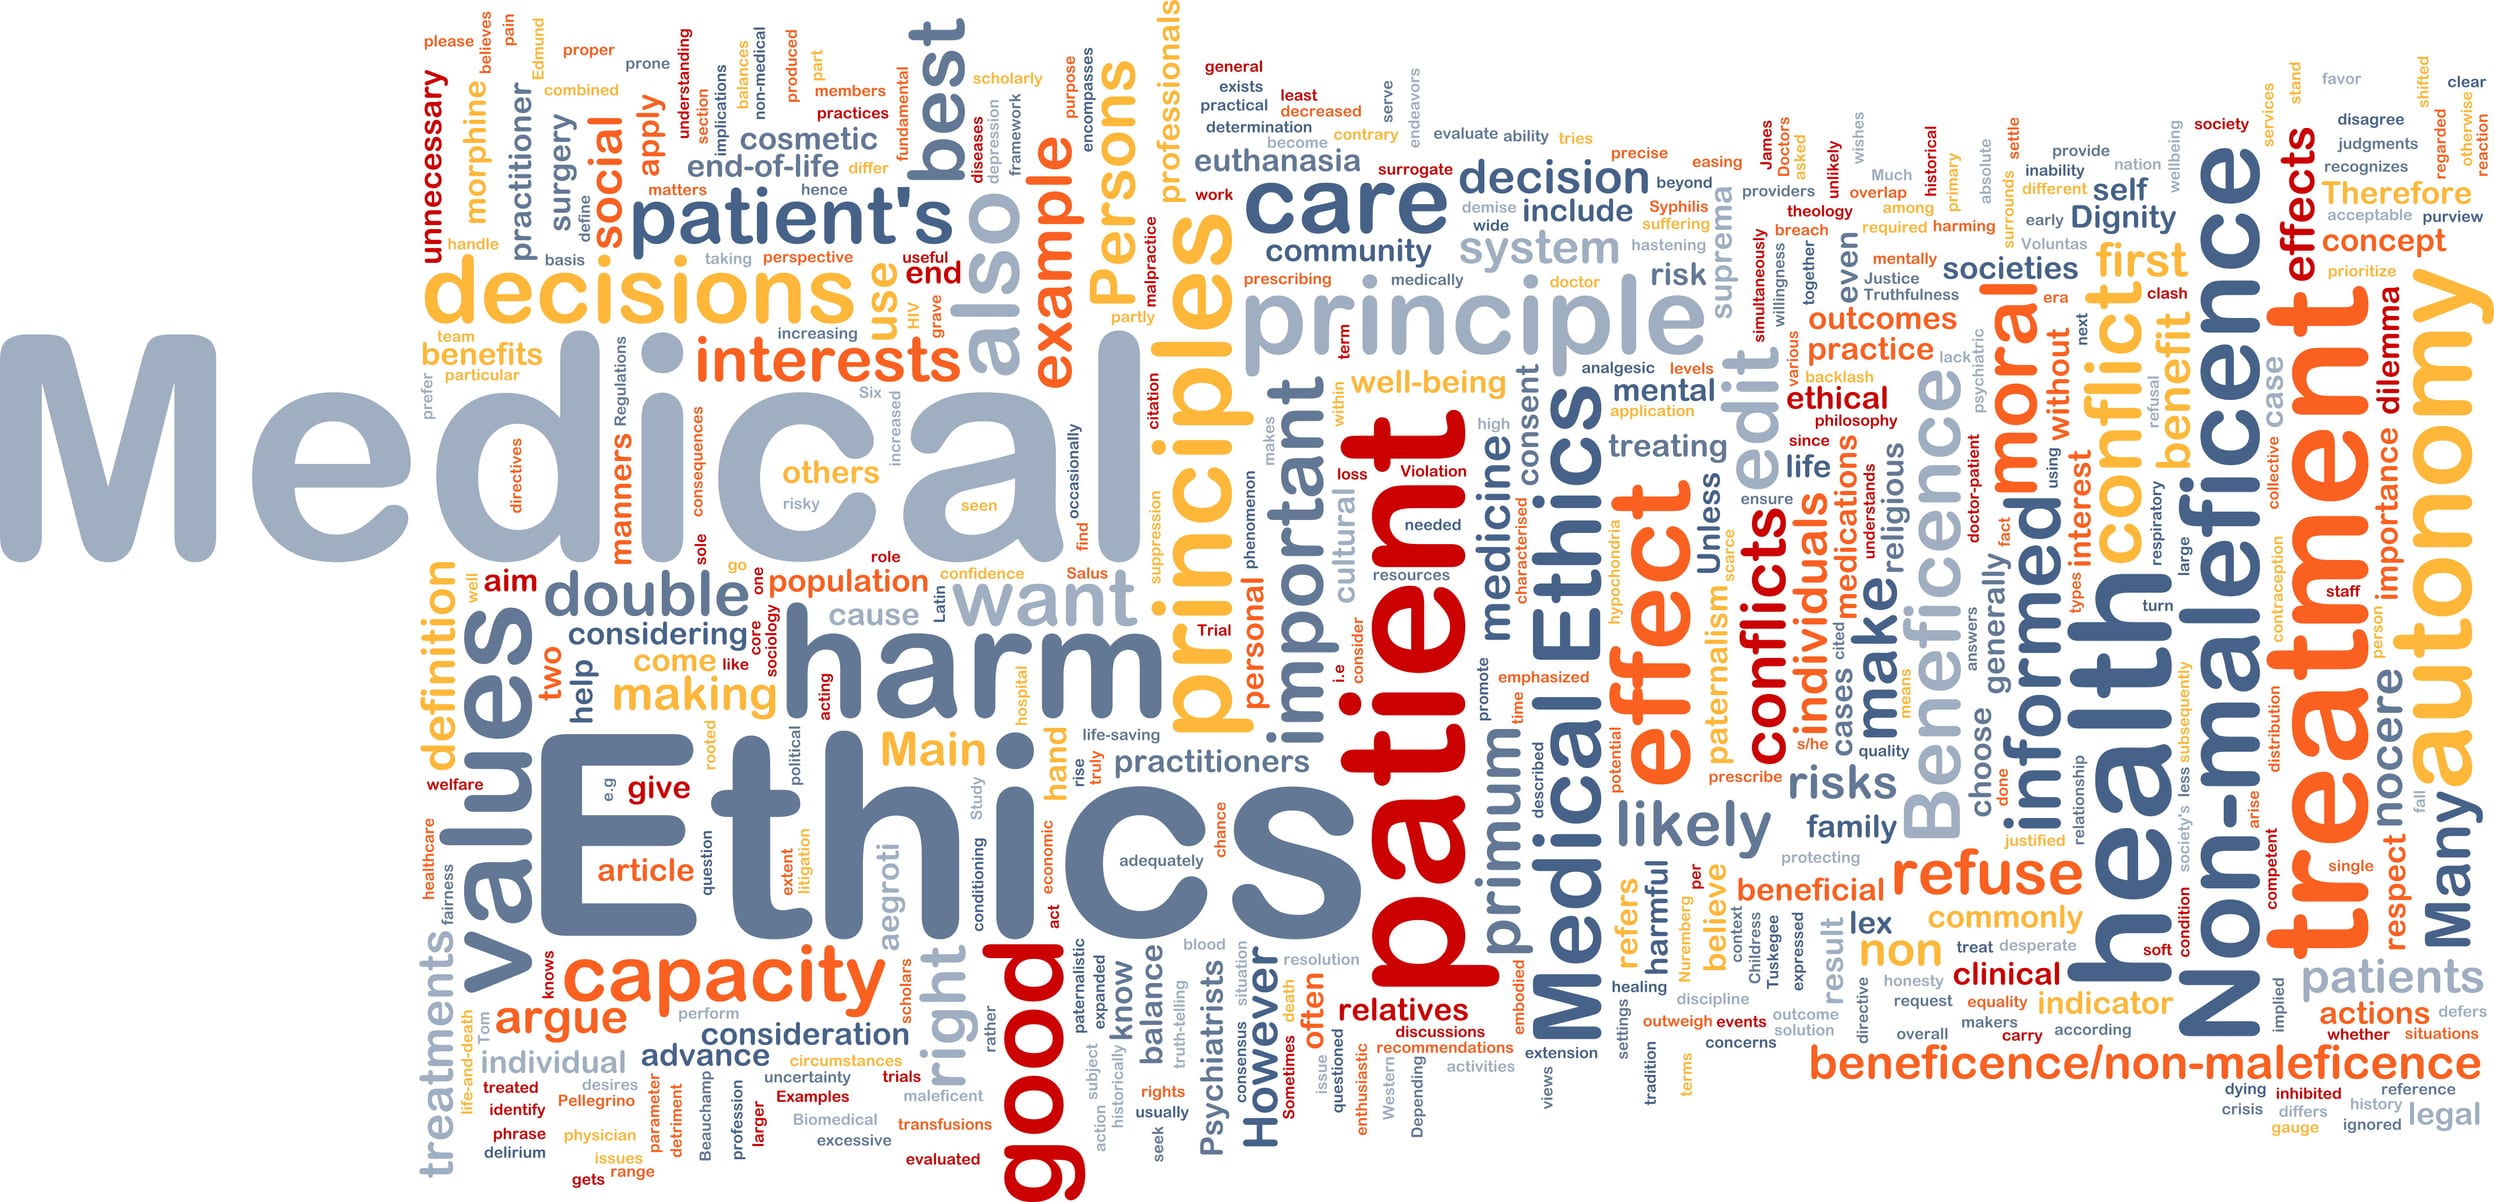 medical dilemmas and issues of research and ethics